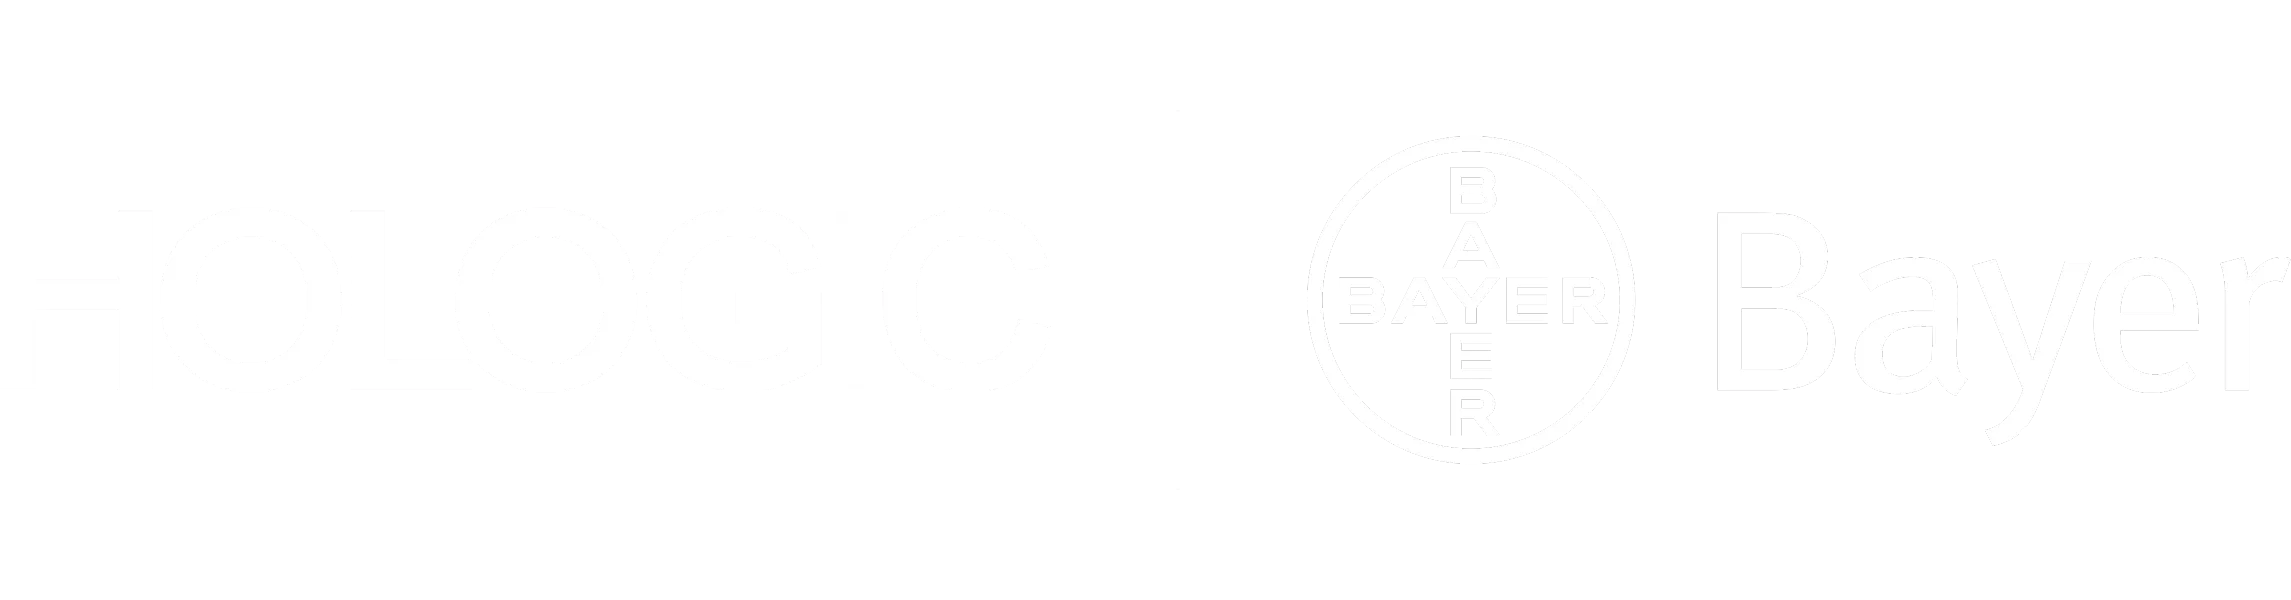 Hologic and Bayer logos on clear background